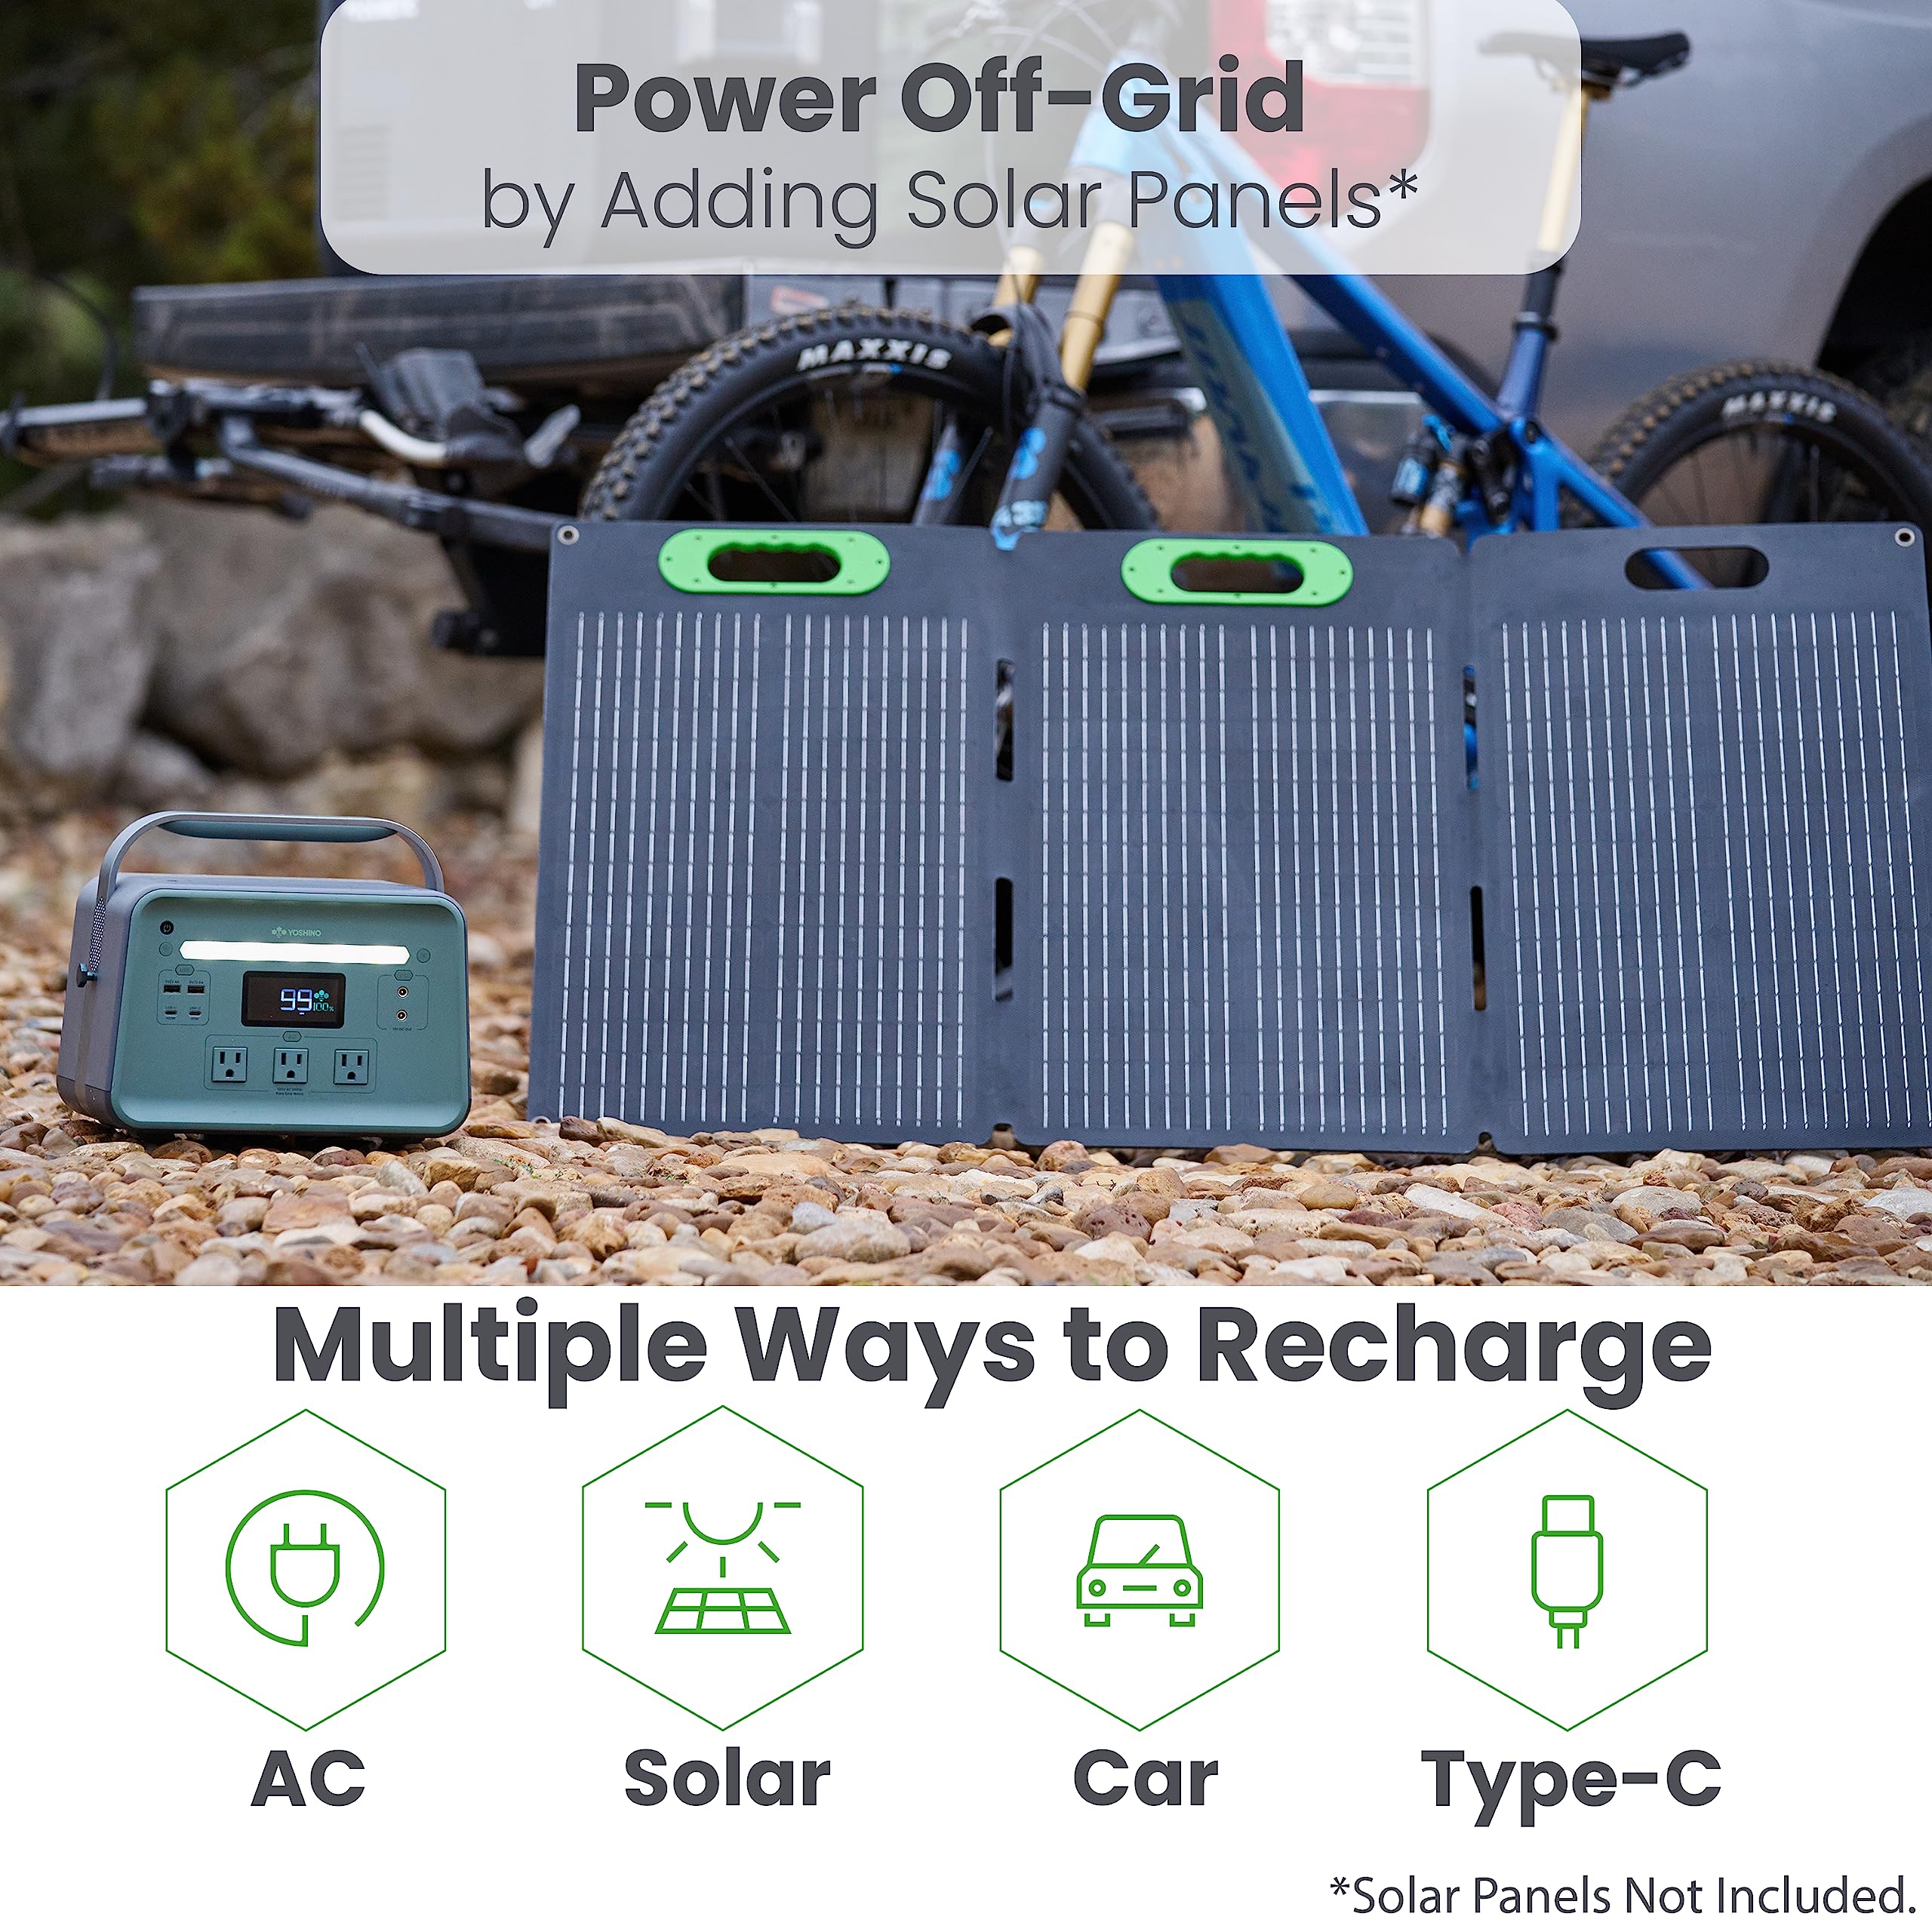 Yoshino B660 SST True Solid-State Portable Power Station 602Wh, Solar Optional Generator, Recharges from 0 to 80% in 4 hours for Emergency, Travel, Outdoor Camping, Vans/RV